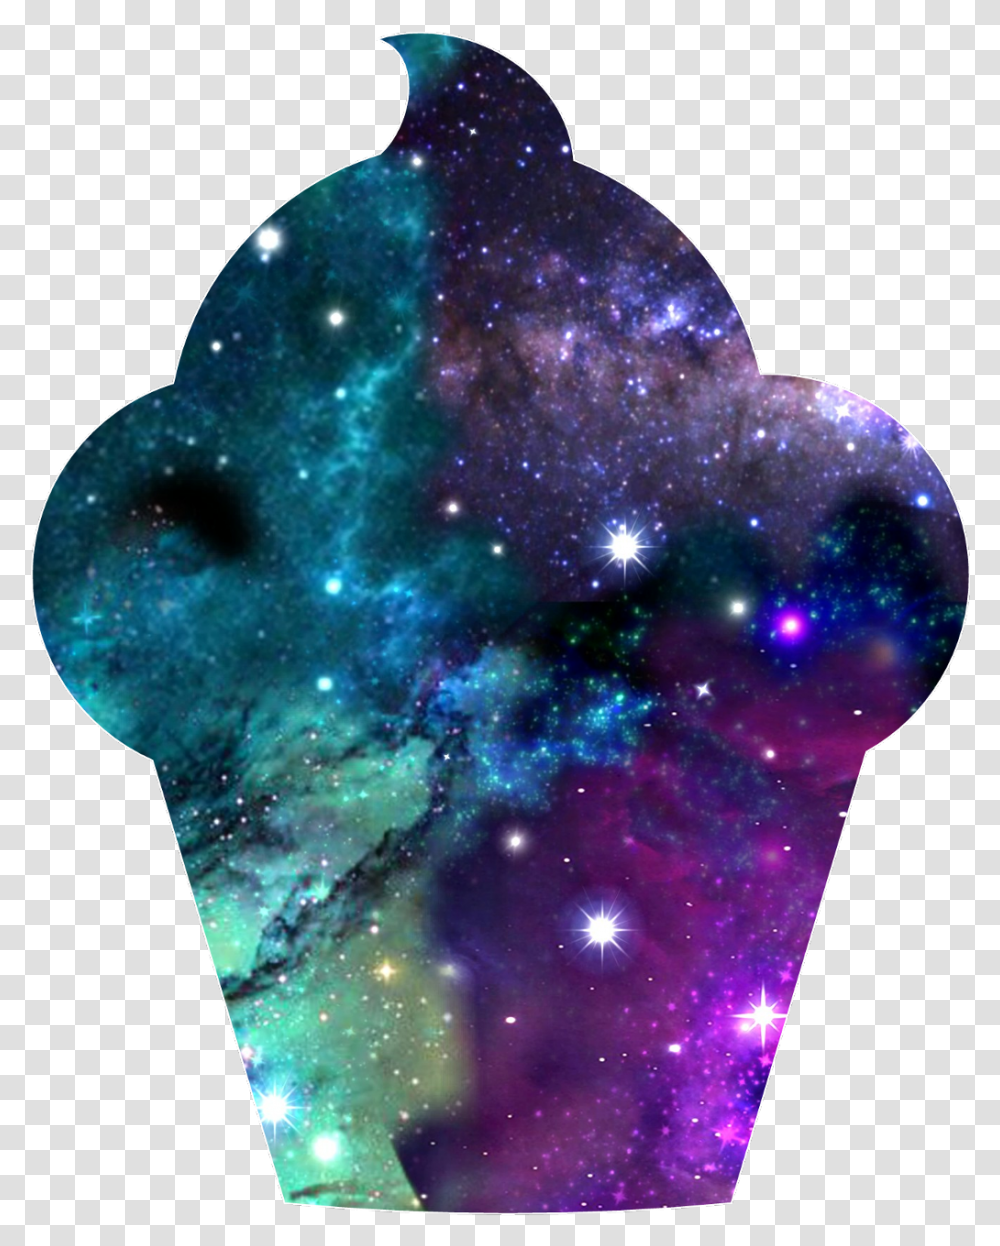 Capcake Cupcake Bolo Doce Galaxia Milky Way, Crystal, Astronomy, Outer Space, Universe Transparent Png